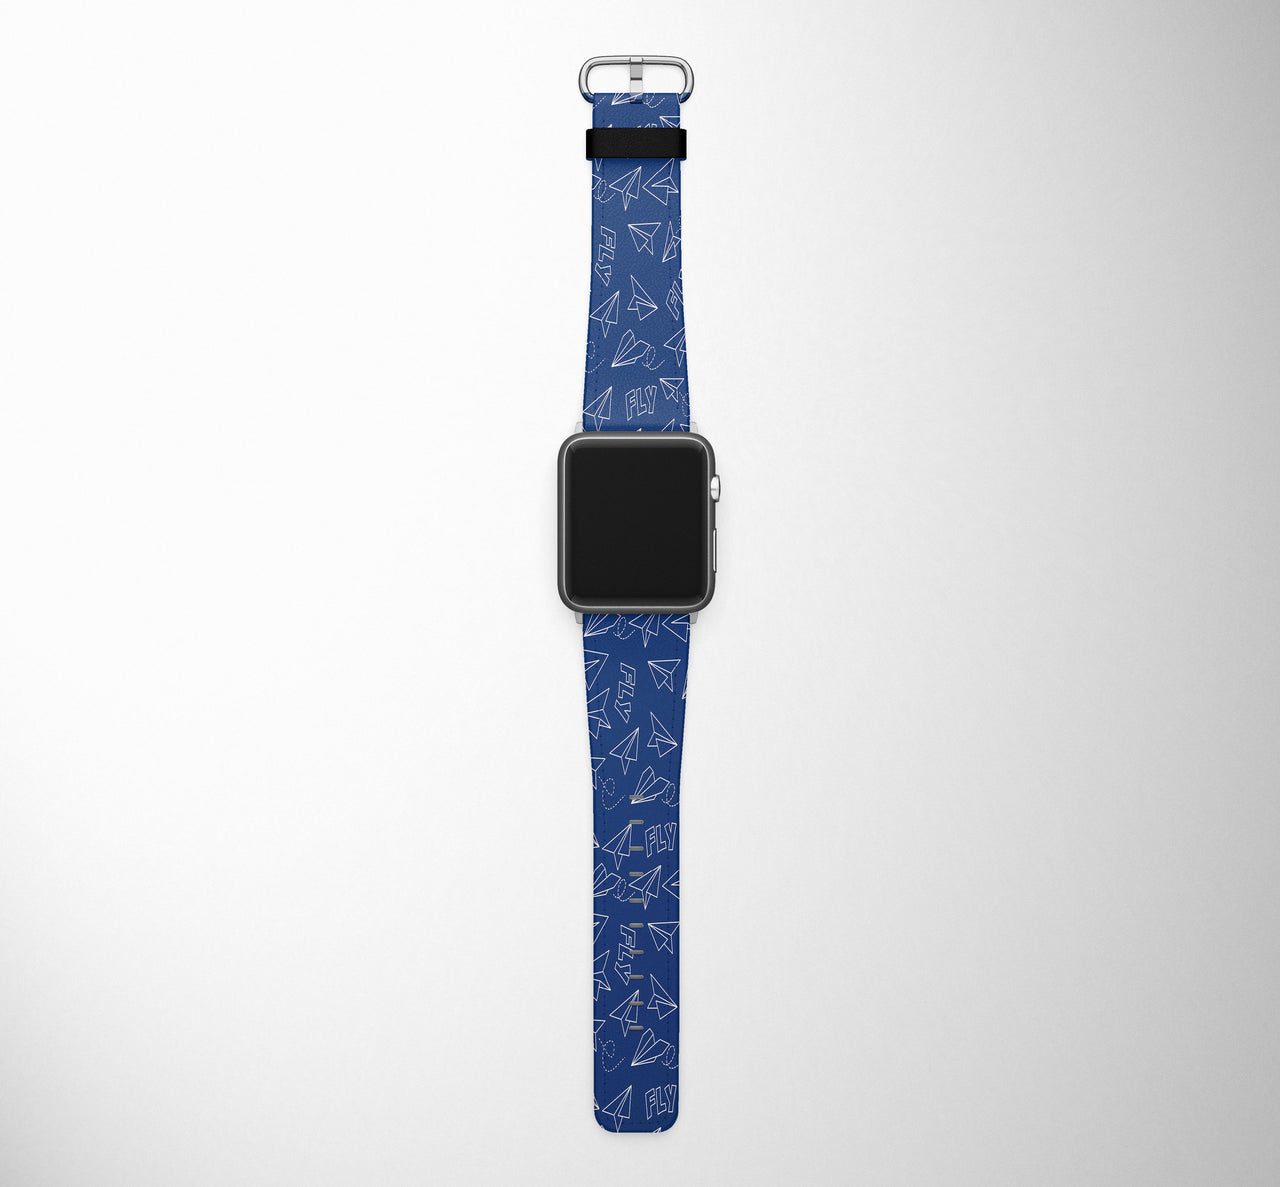 Paper Airplane & Fly (Blue) Designed Leather Apple Watch Straps